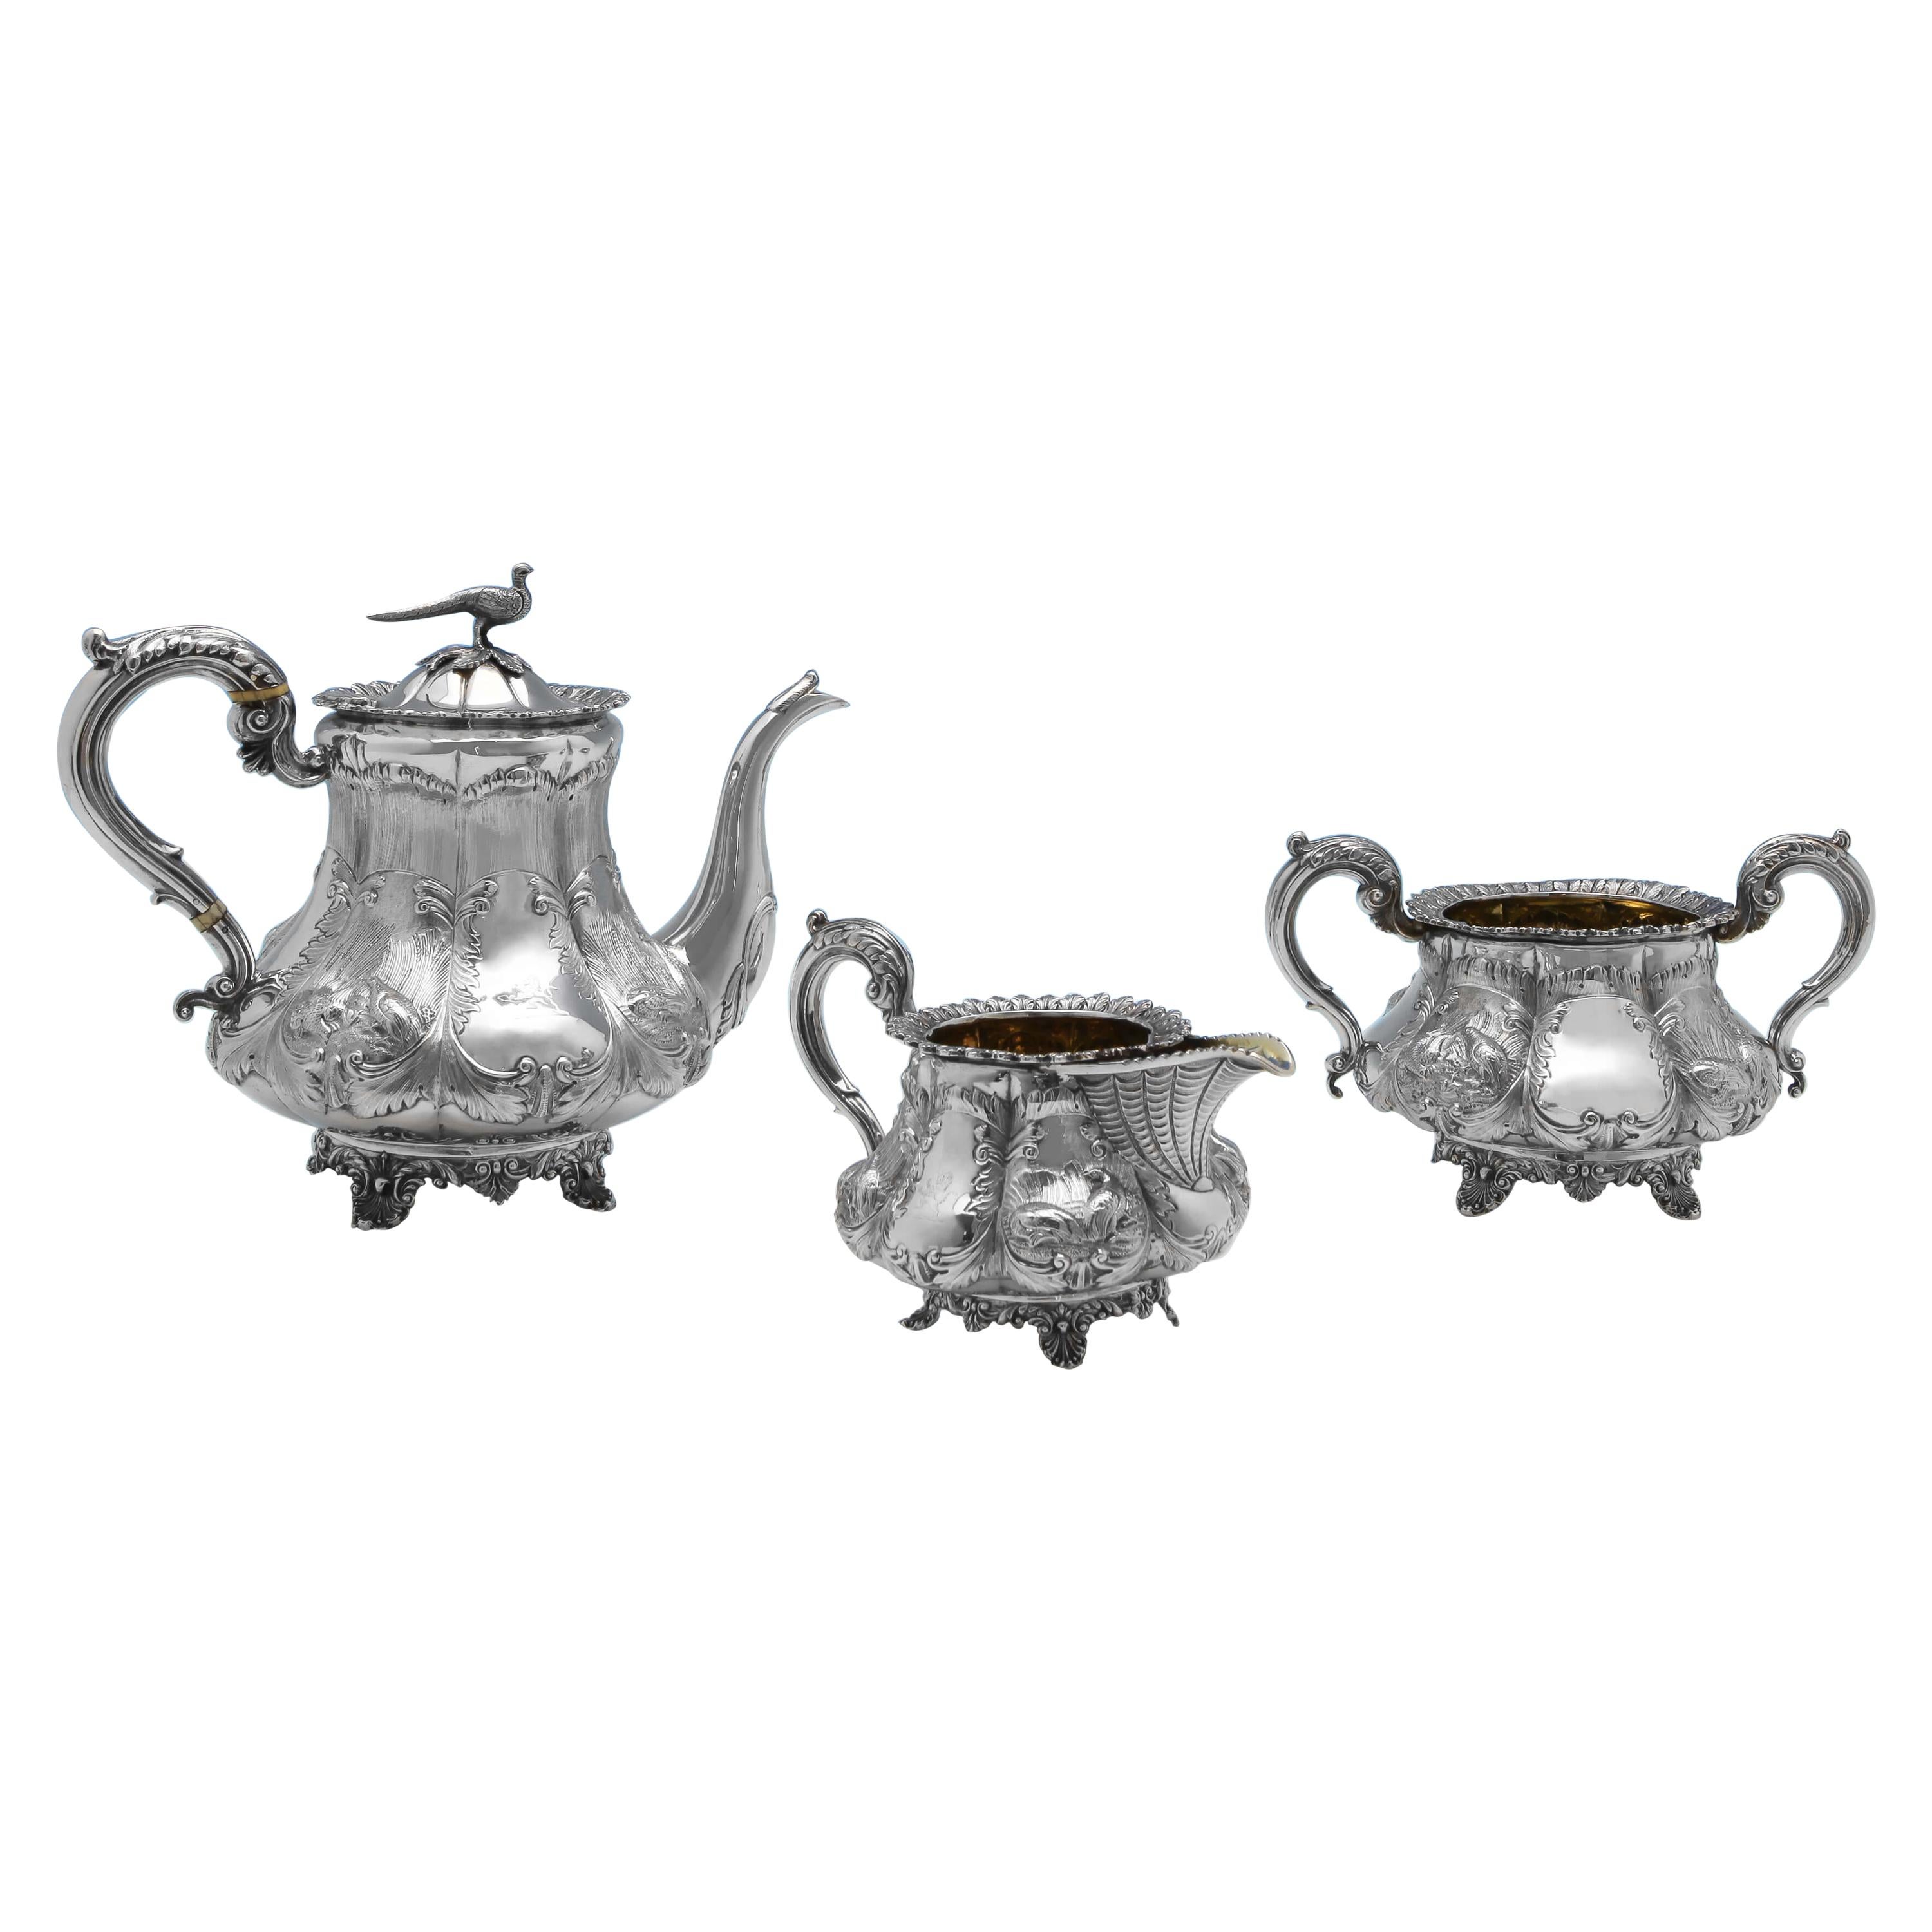 Antique Sterling Silver Tea Set With Pheasant Decoration by Benjamin Smith 1836